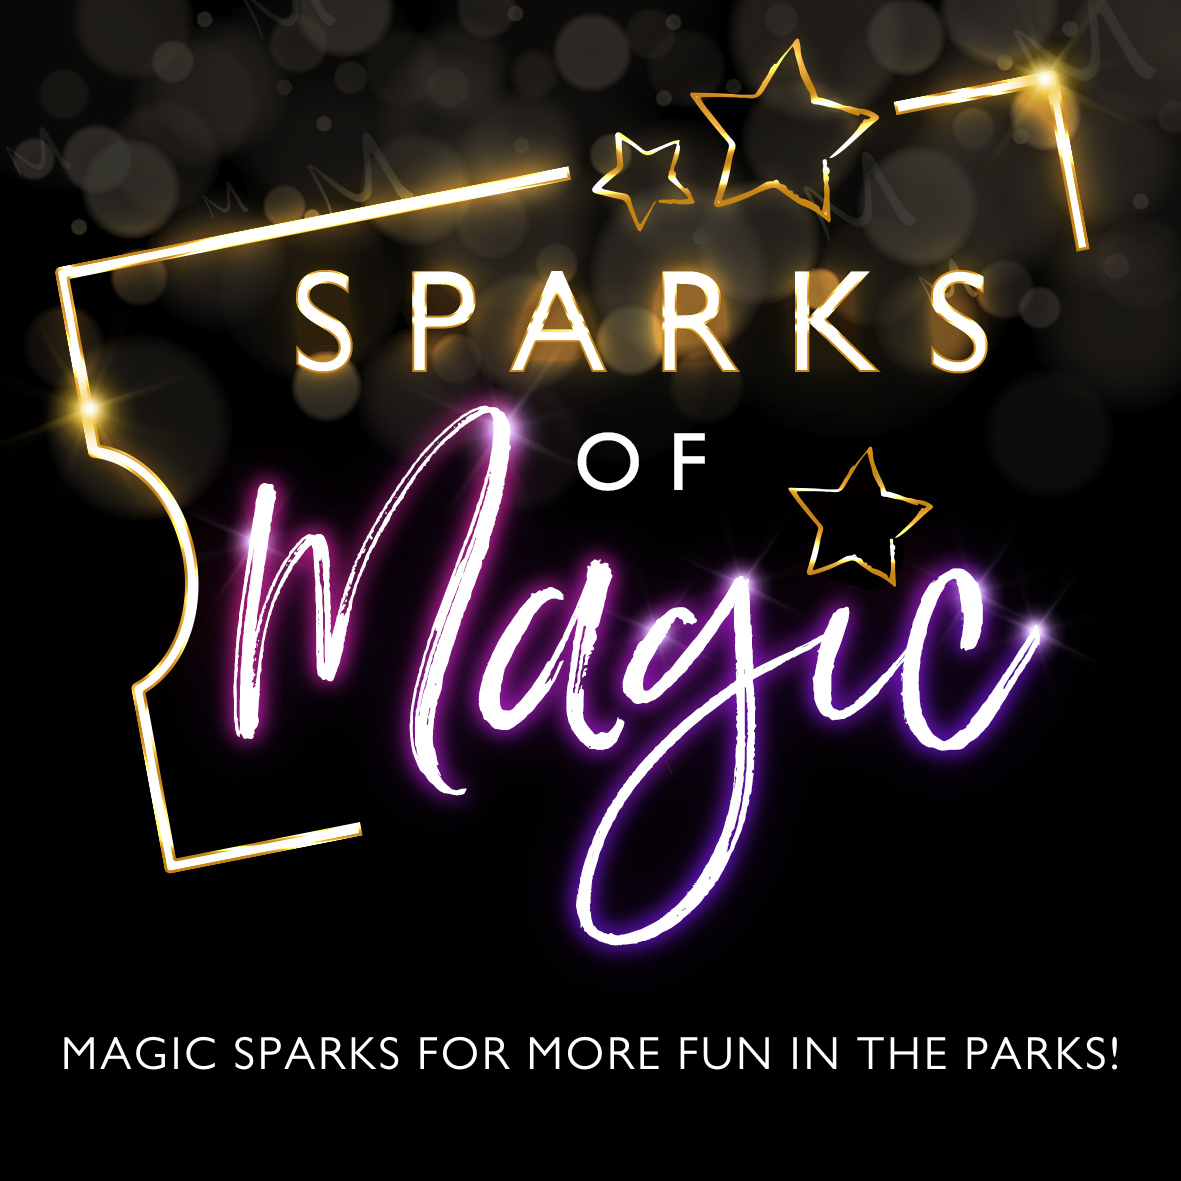 Sparks of Magic